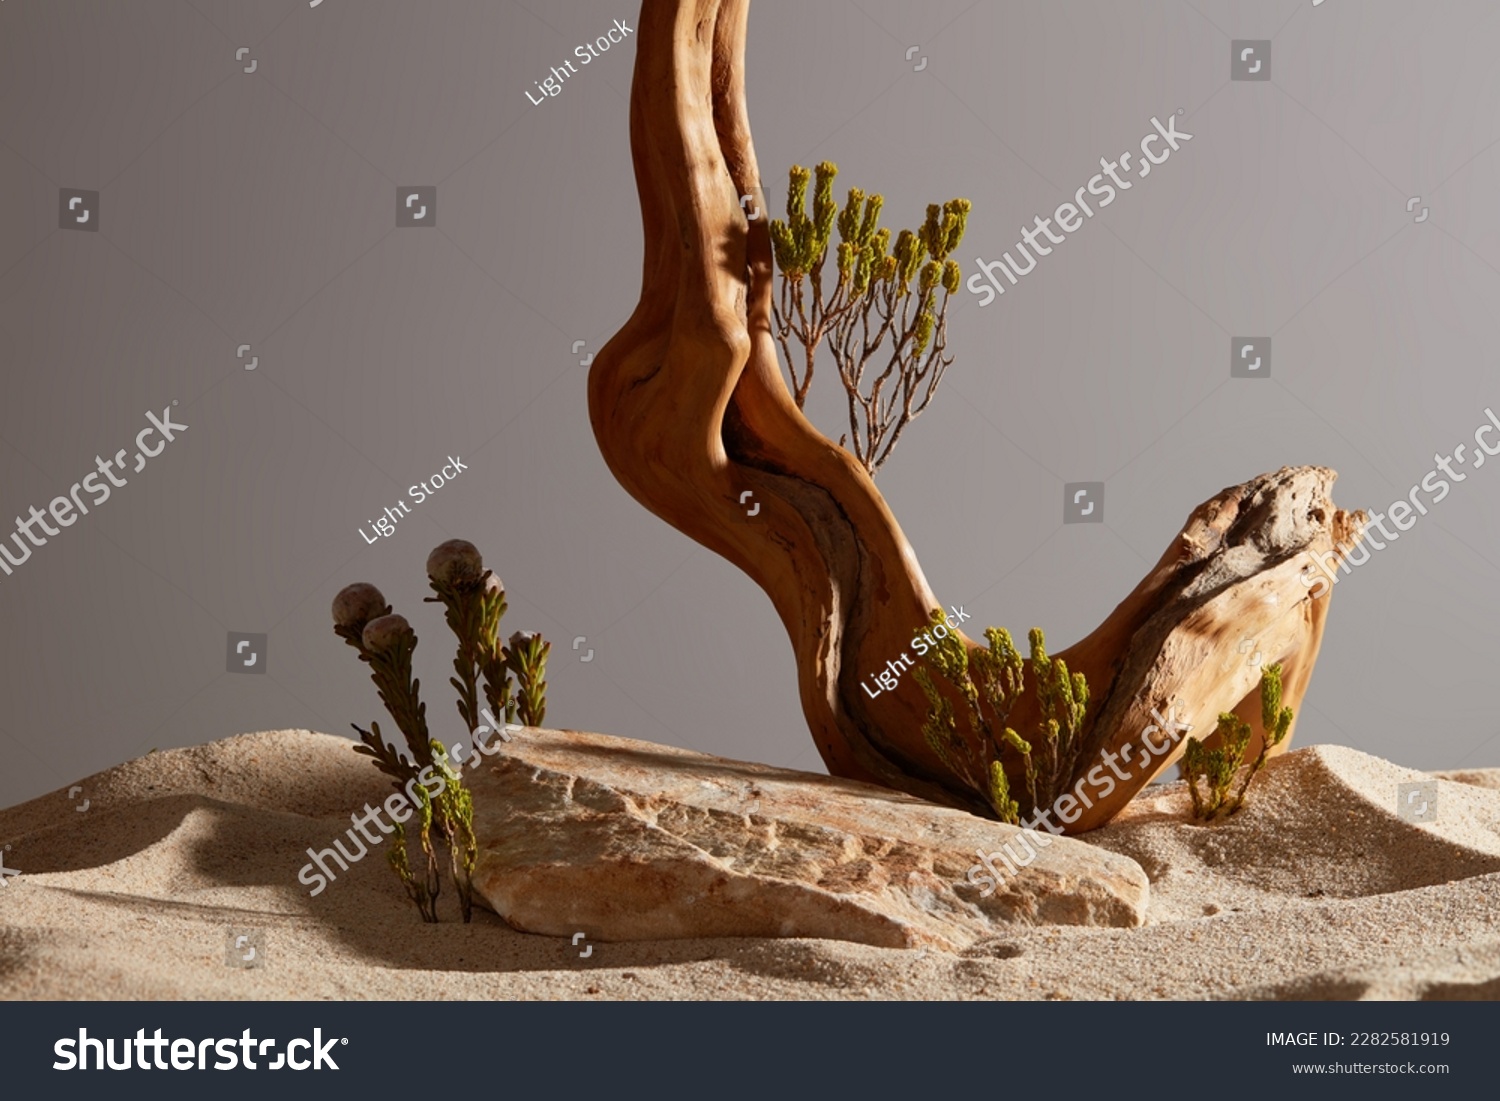 Front view of rock, dry twig, small green tree and sand desert on dark brown. Empty rock as platform for display product. Natural beauty concept, minimal background. #2282581919